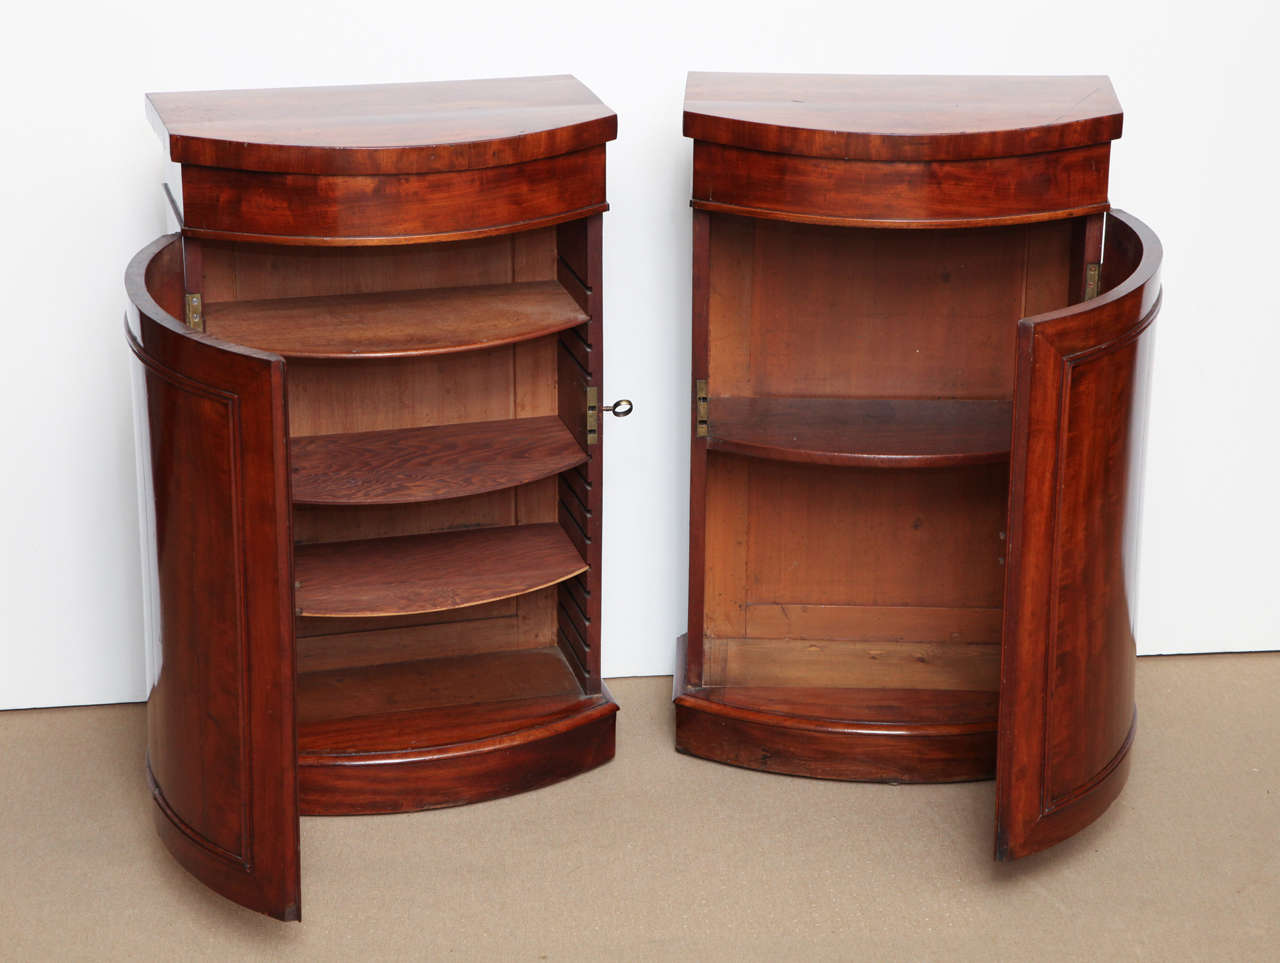 Pair of Early 19th Century Danish, Mahogany Cupboards For Sale 1